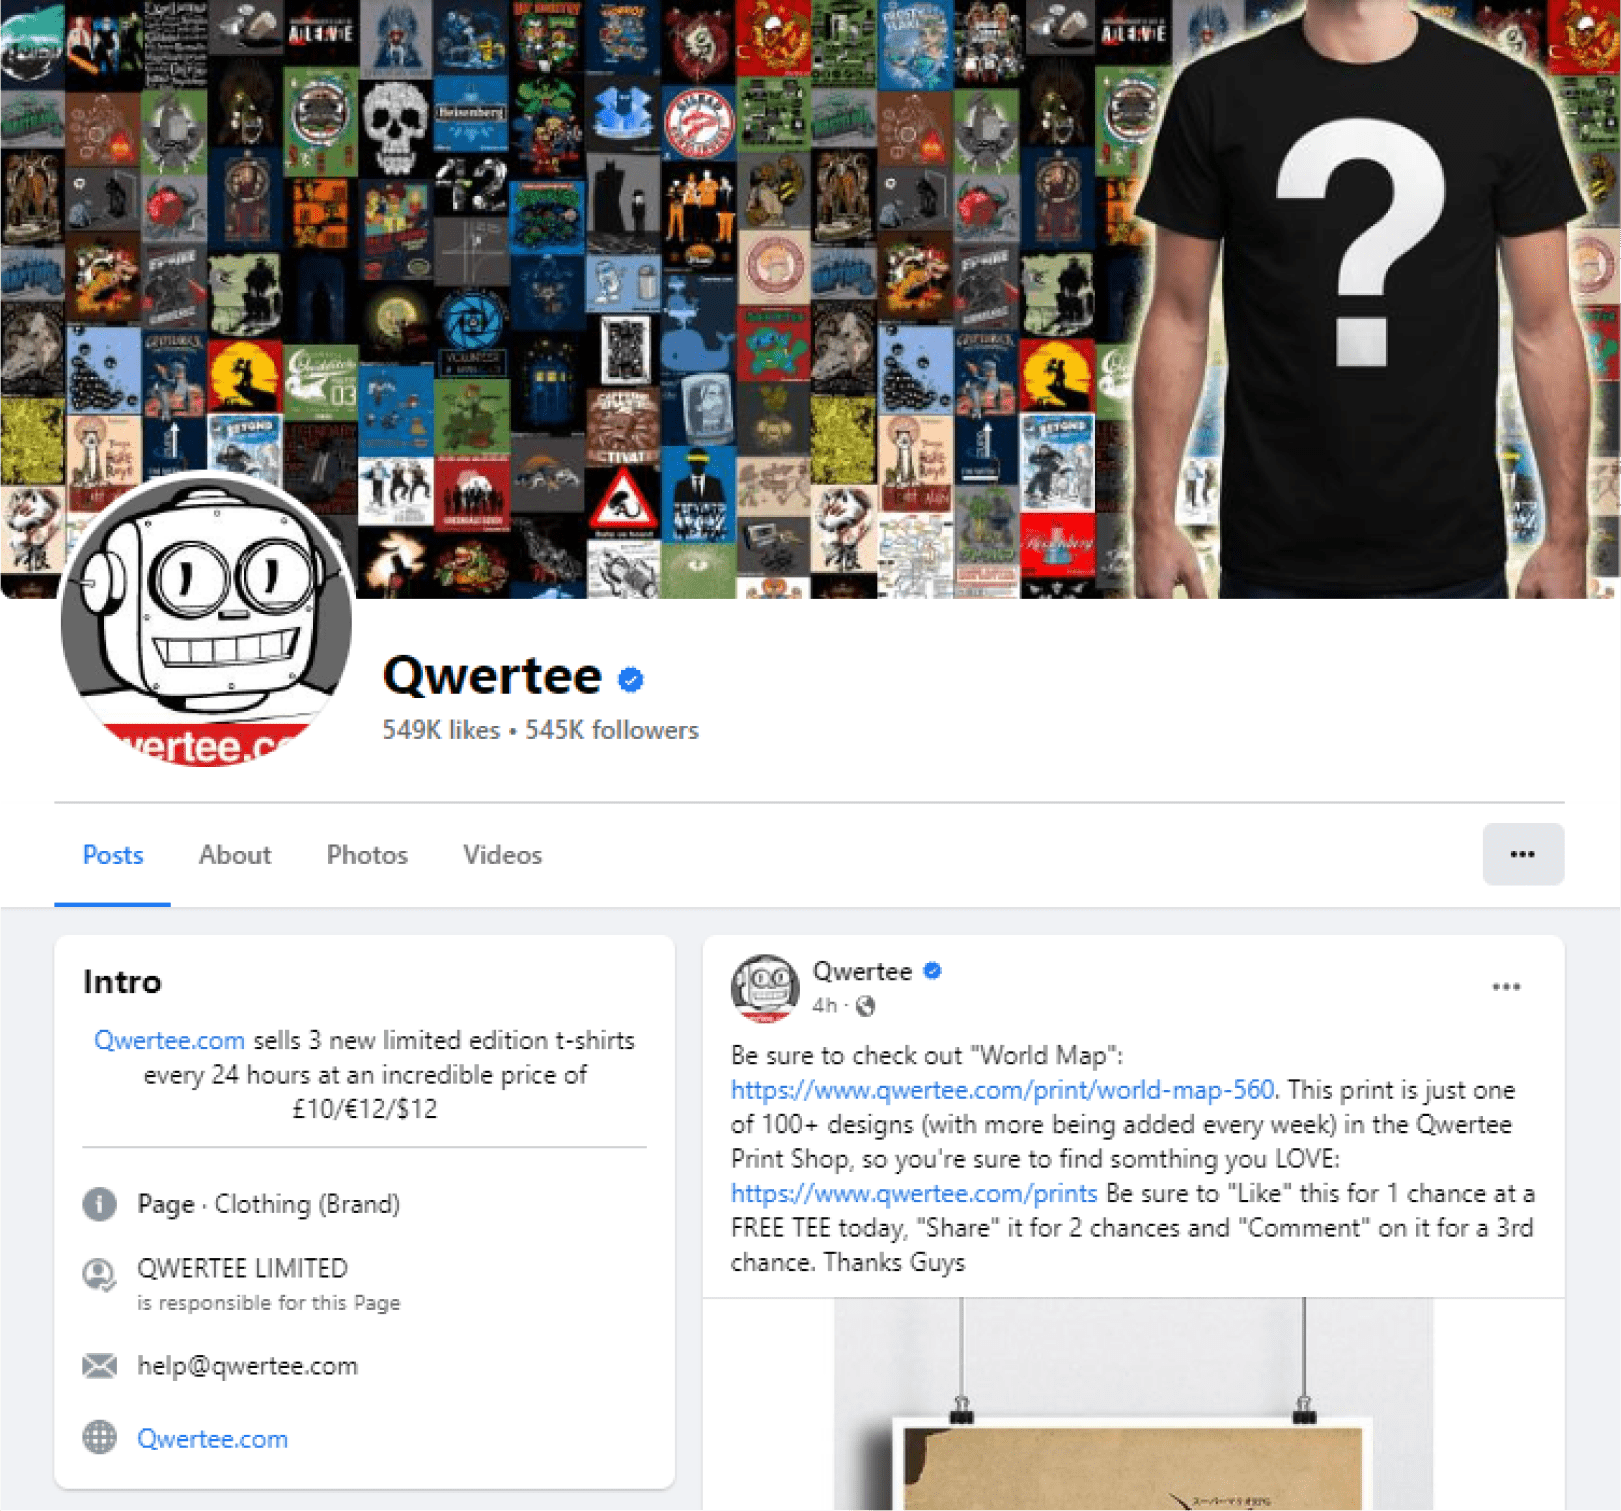 Screenshot of Qwertee's Facebook page with a mosaic of unique T-shirt designs and a promotional post for a 'World Map' T-shirt, demonstrating effective brand awareness and engagement strategy.